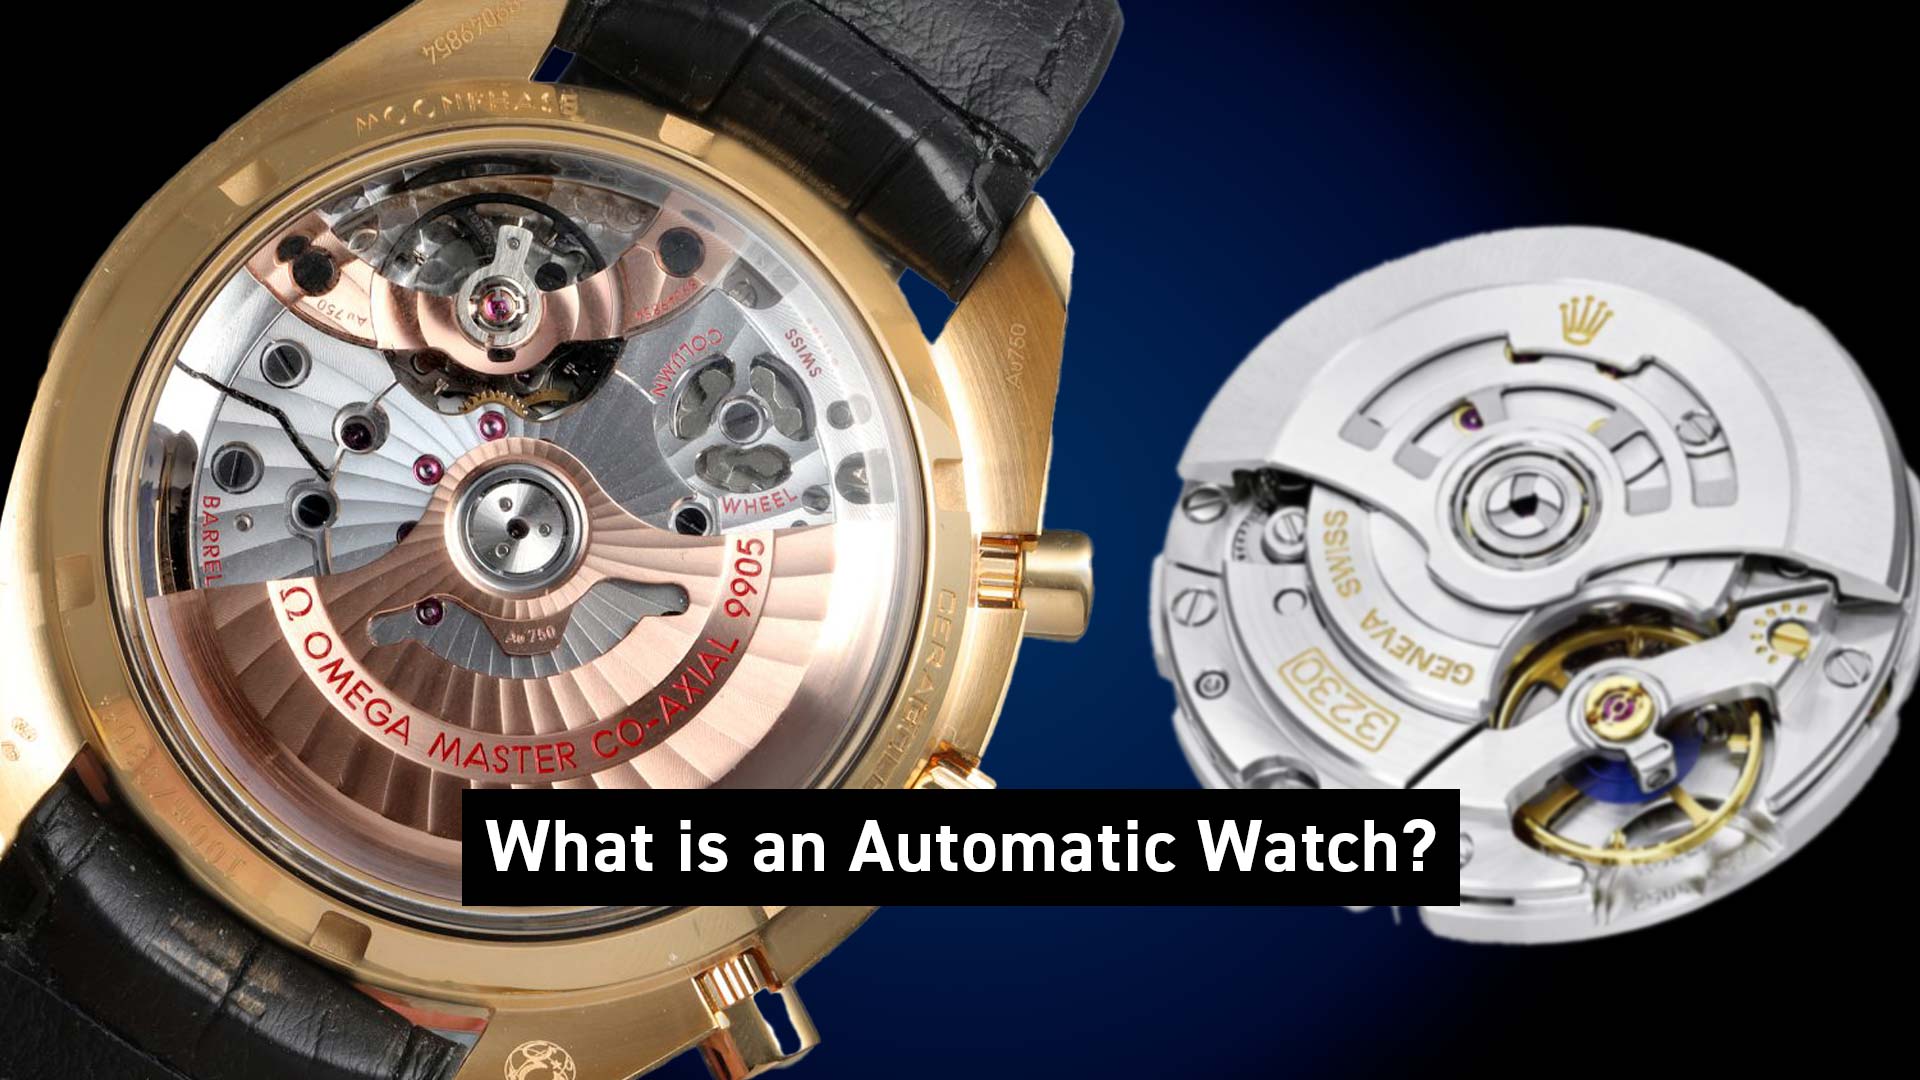 What is an Automatic Watch?